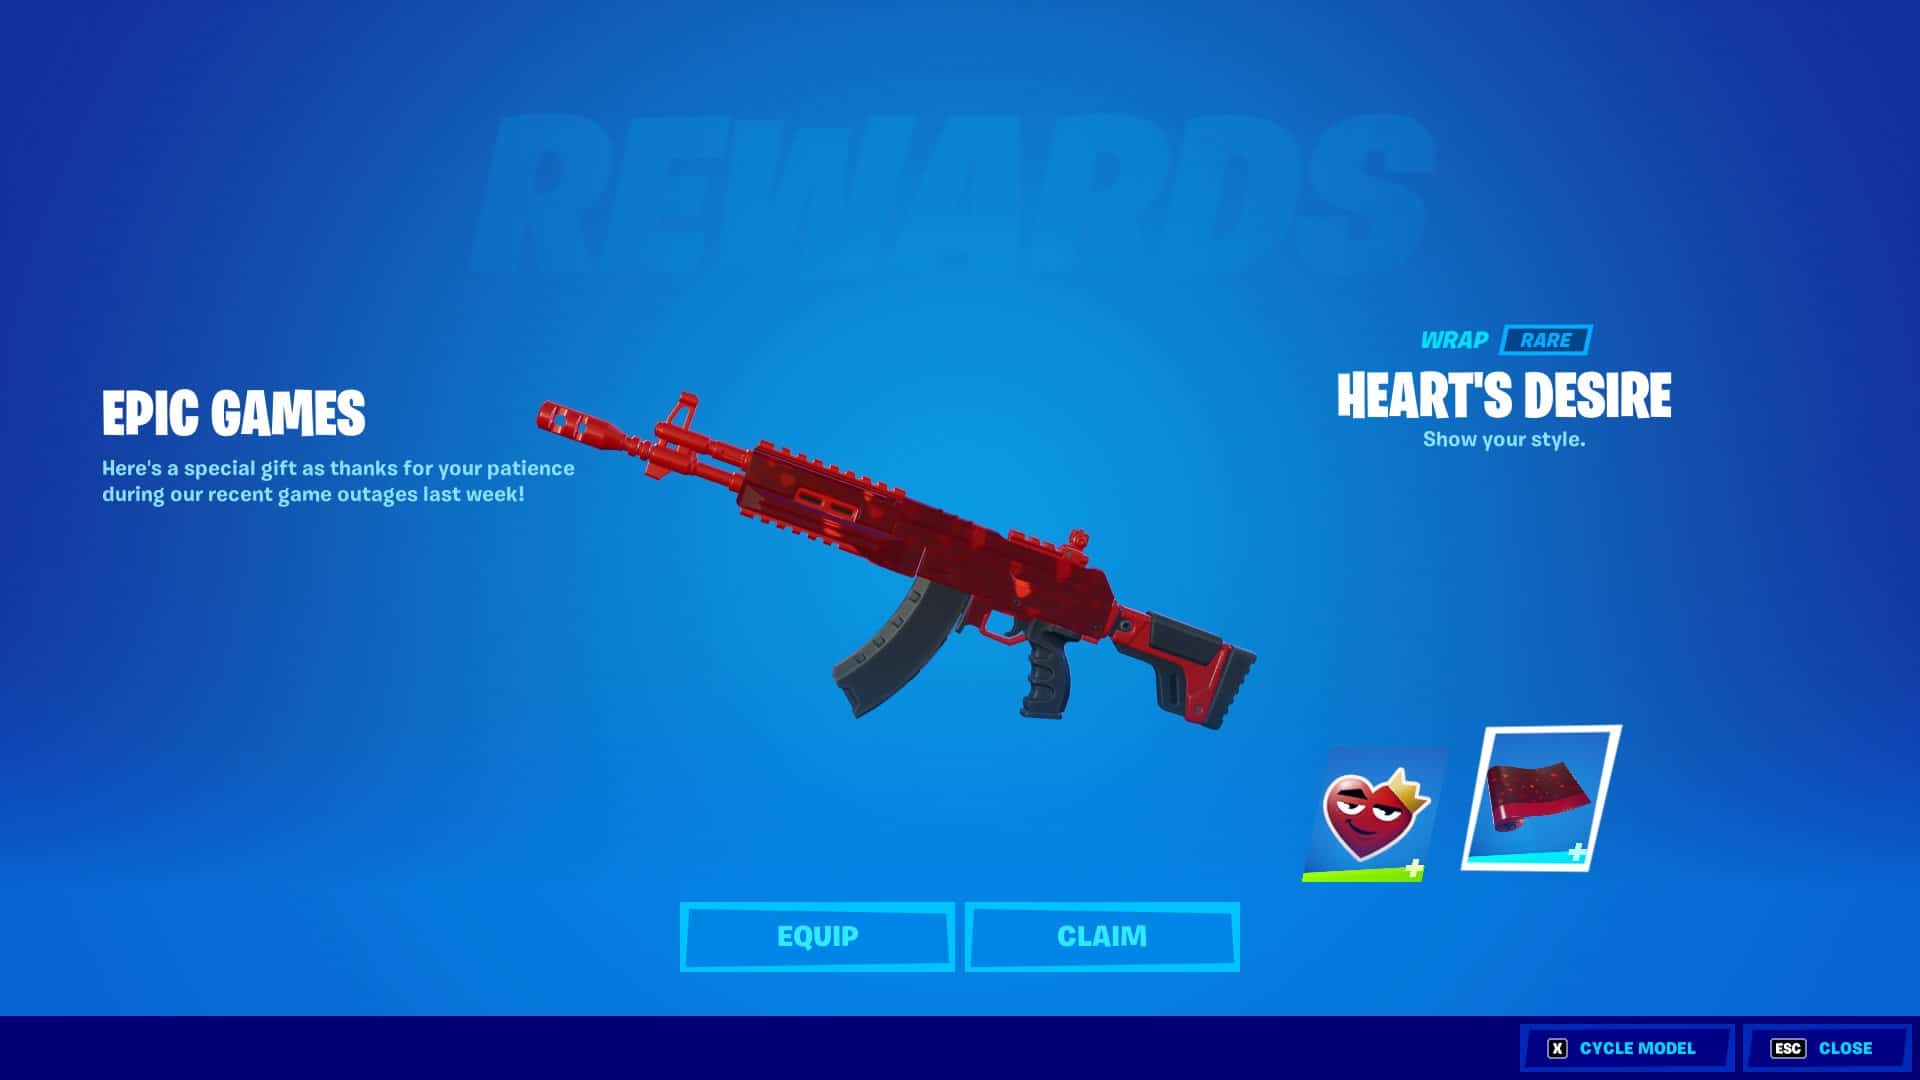 Heart’s Desire free wrap as compensation in Fortnite